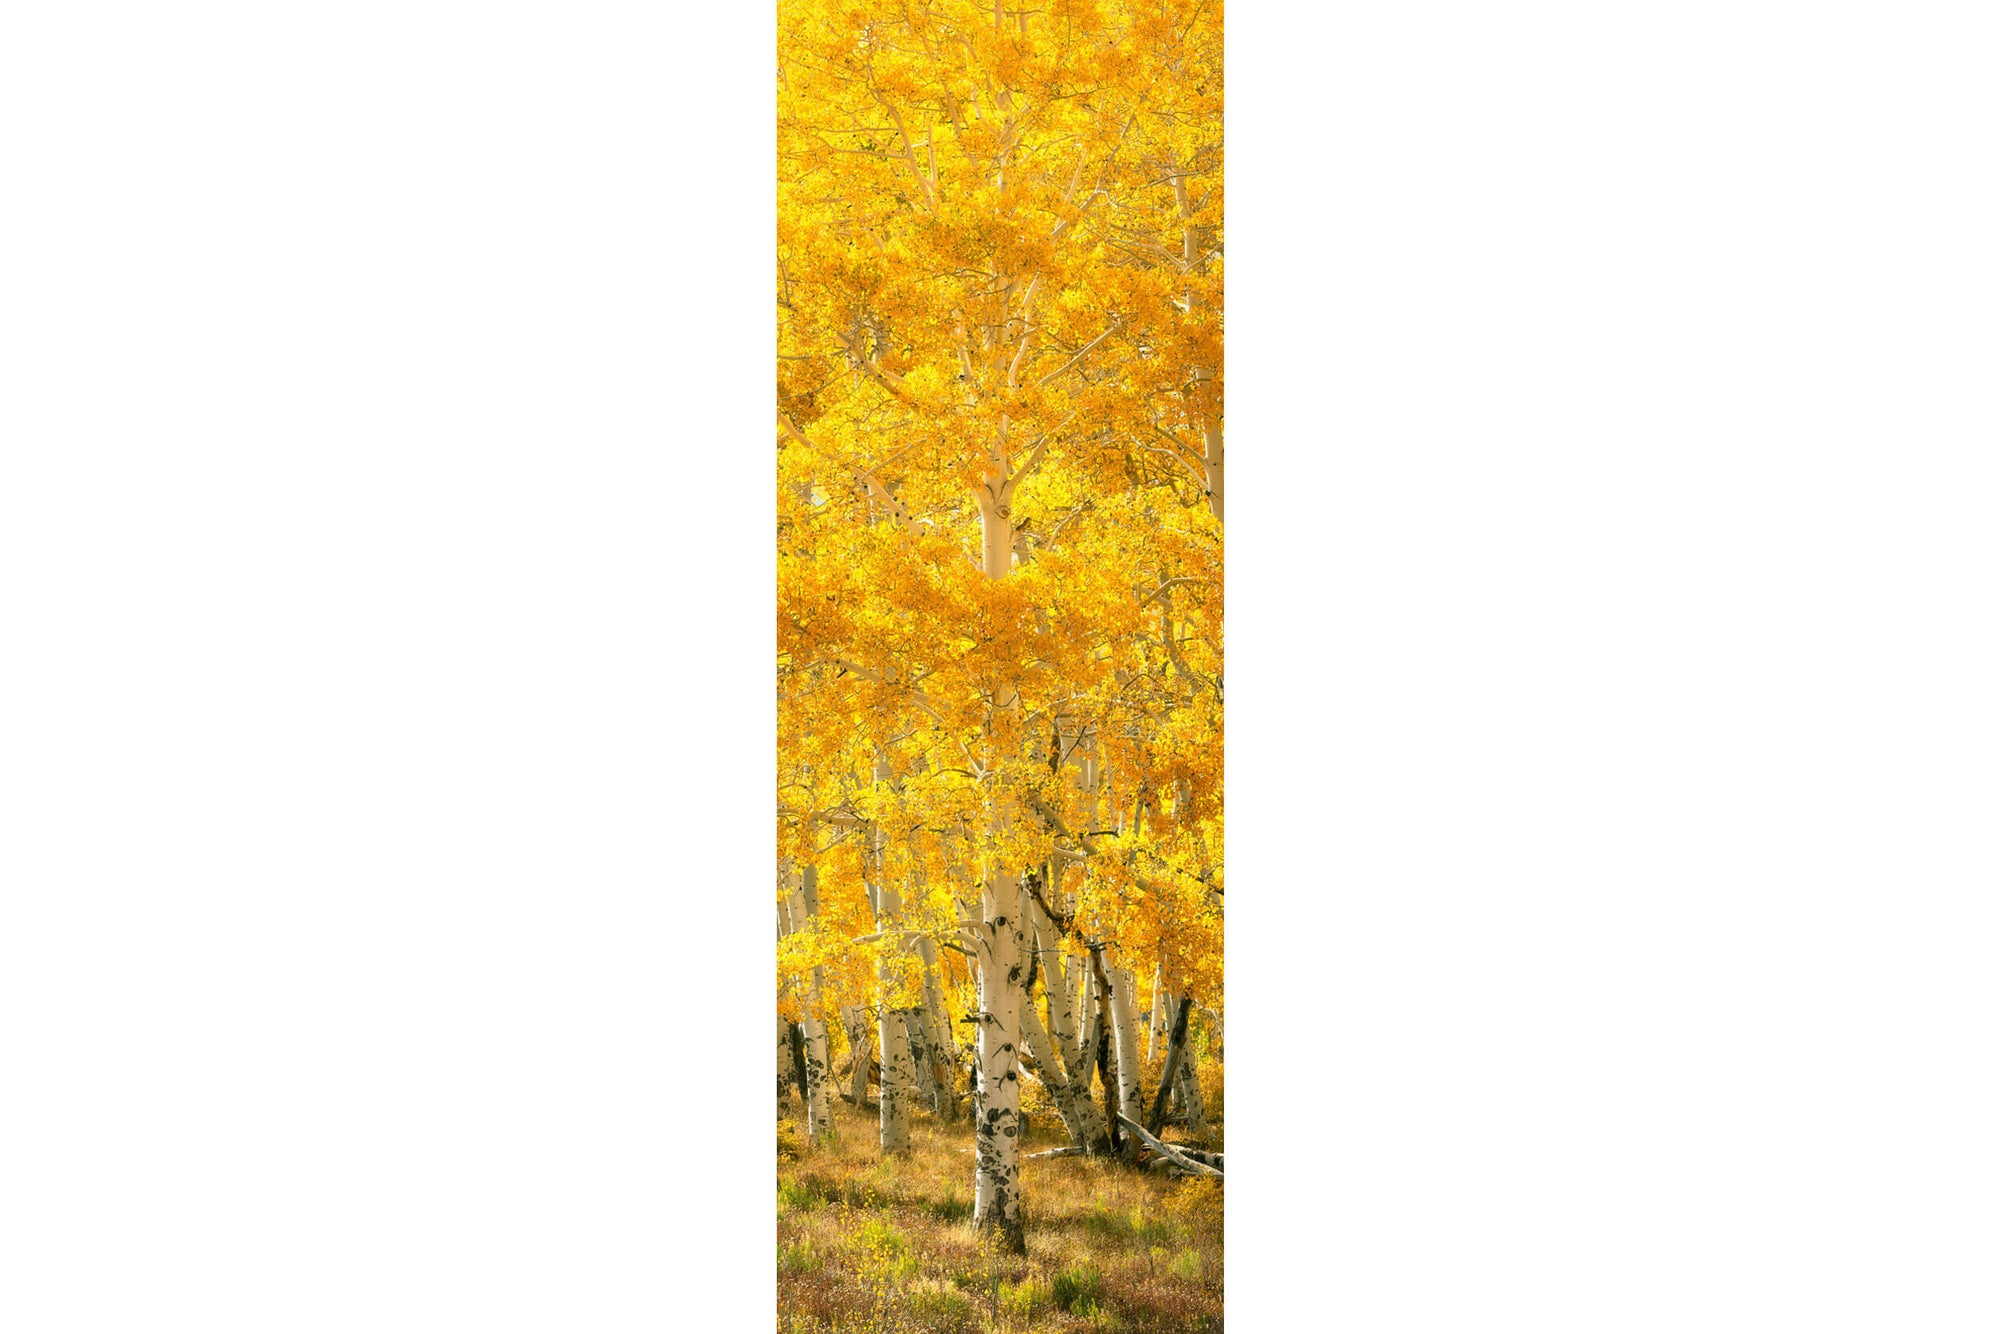 A picture of fall colors in Telluride, Colorado - a single yellow aspen tree.